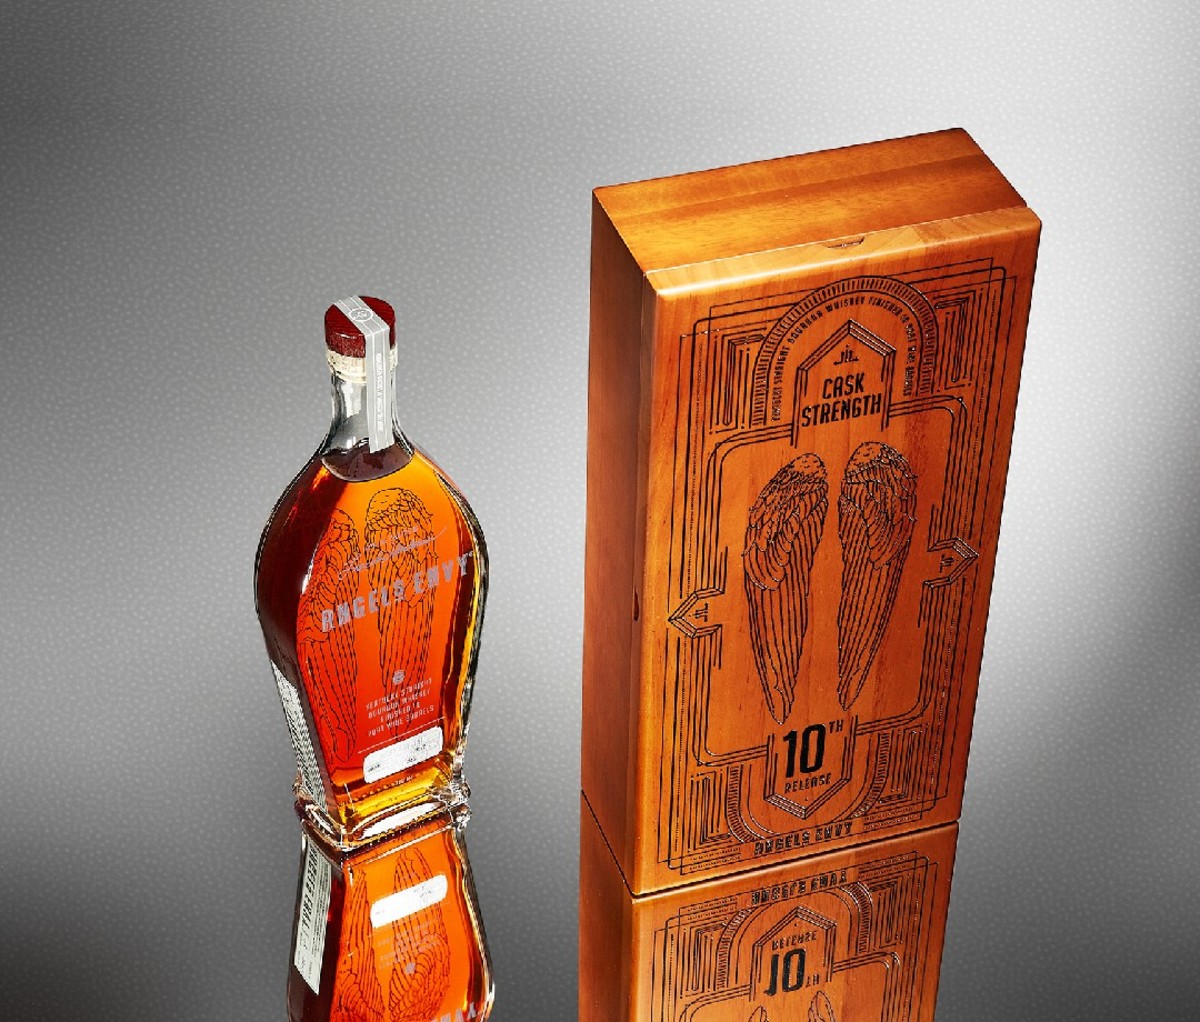 Bottle of whiskey next to box with wings etched on front